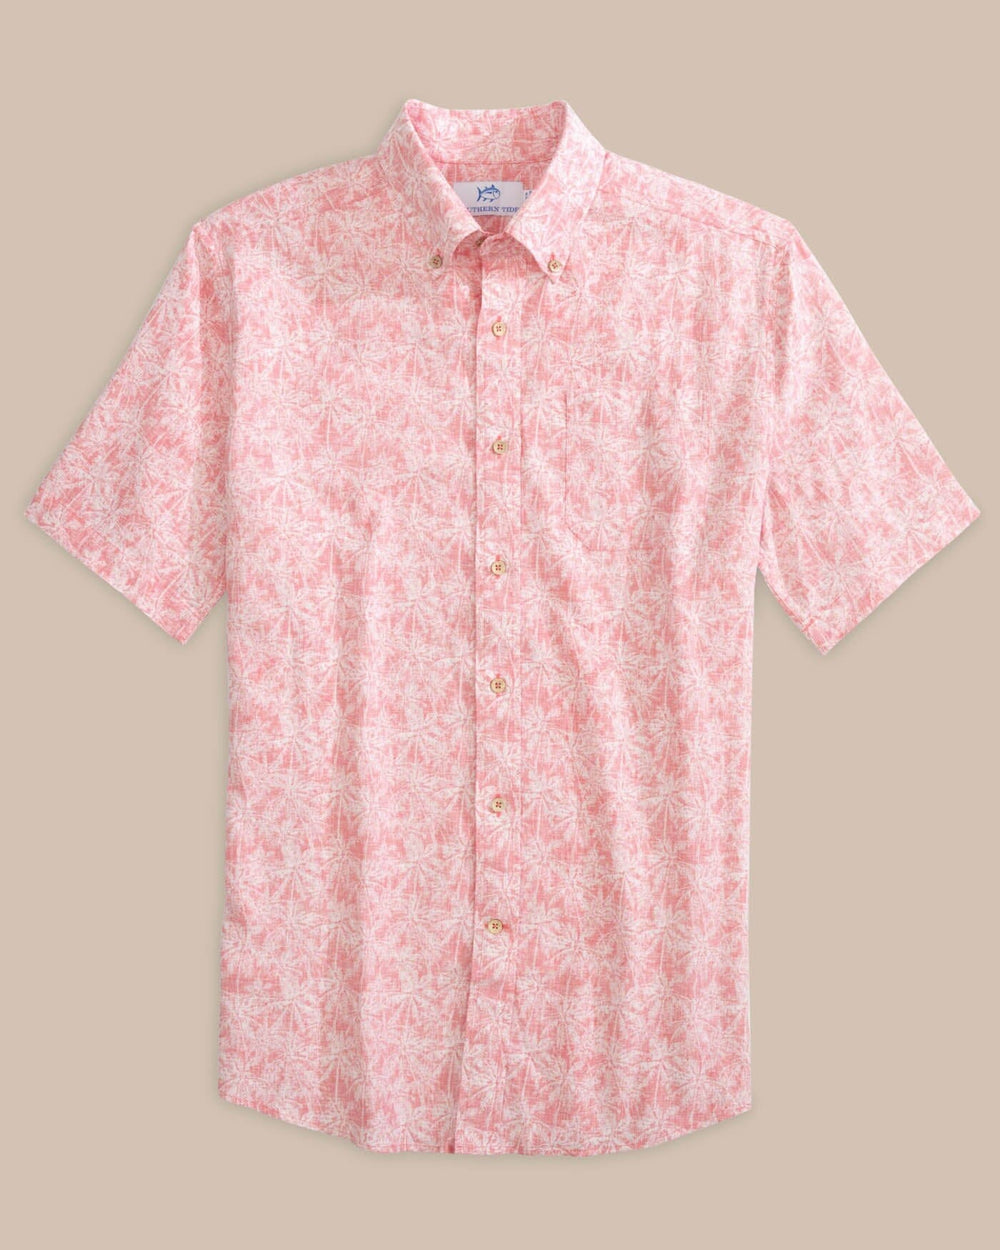 The front view of the Southern Tide Linen Rayon Keep Palm and Carry On Print Sport Shirt by Southern Tide - Rosewood Red